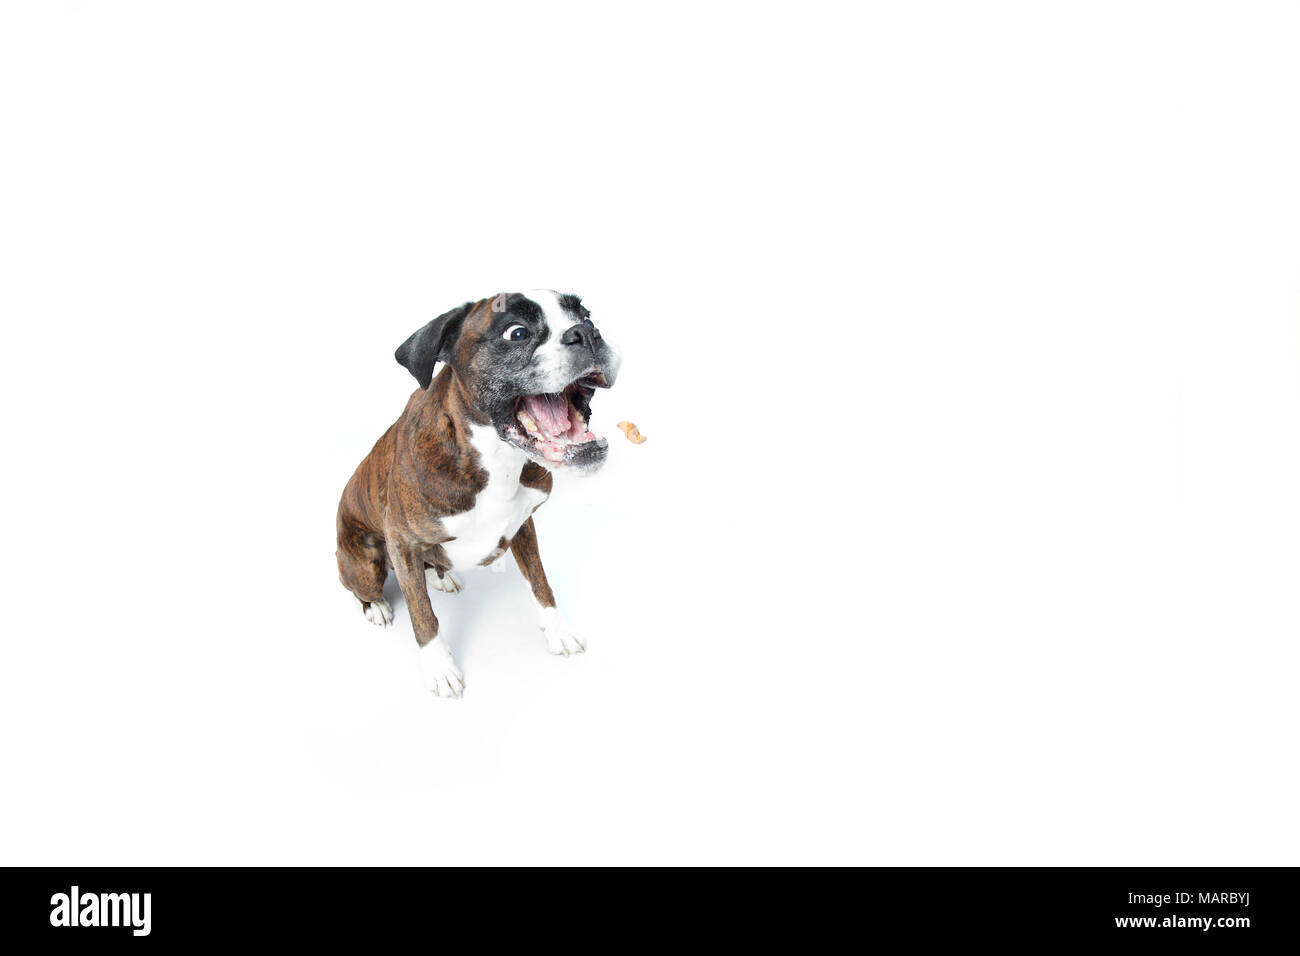 Boxer. Adult bitch sitting, fetching a treat. Studio picture against a white background. Germany Stock Photo